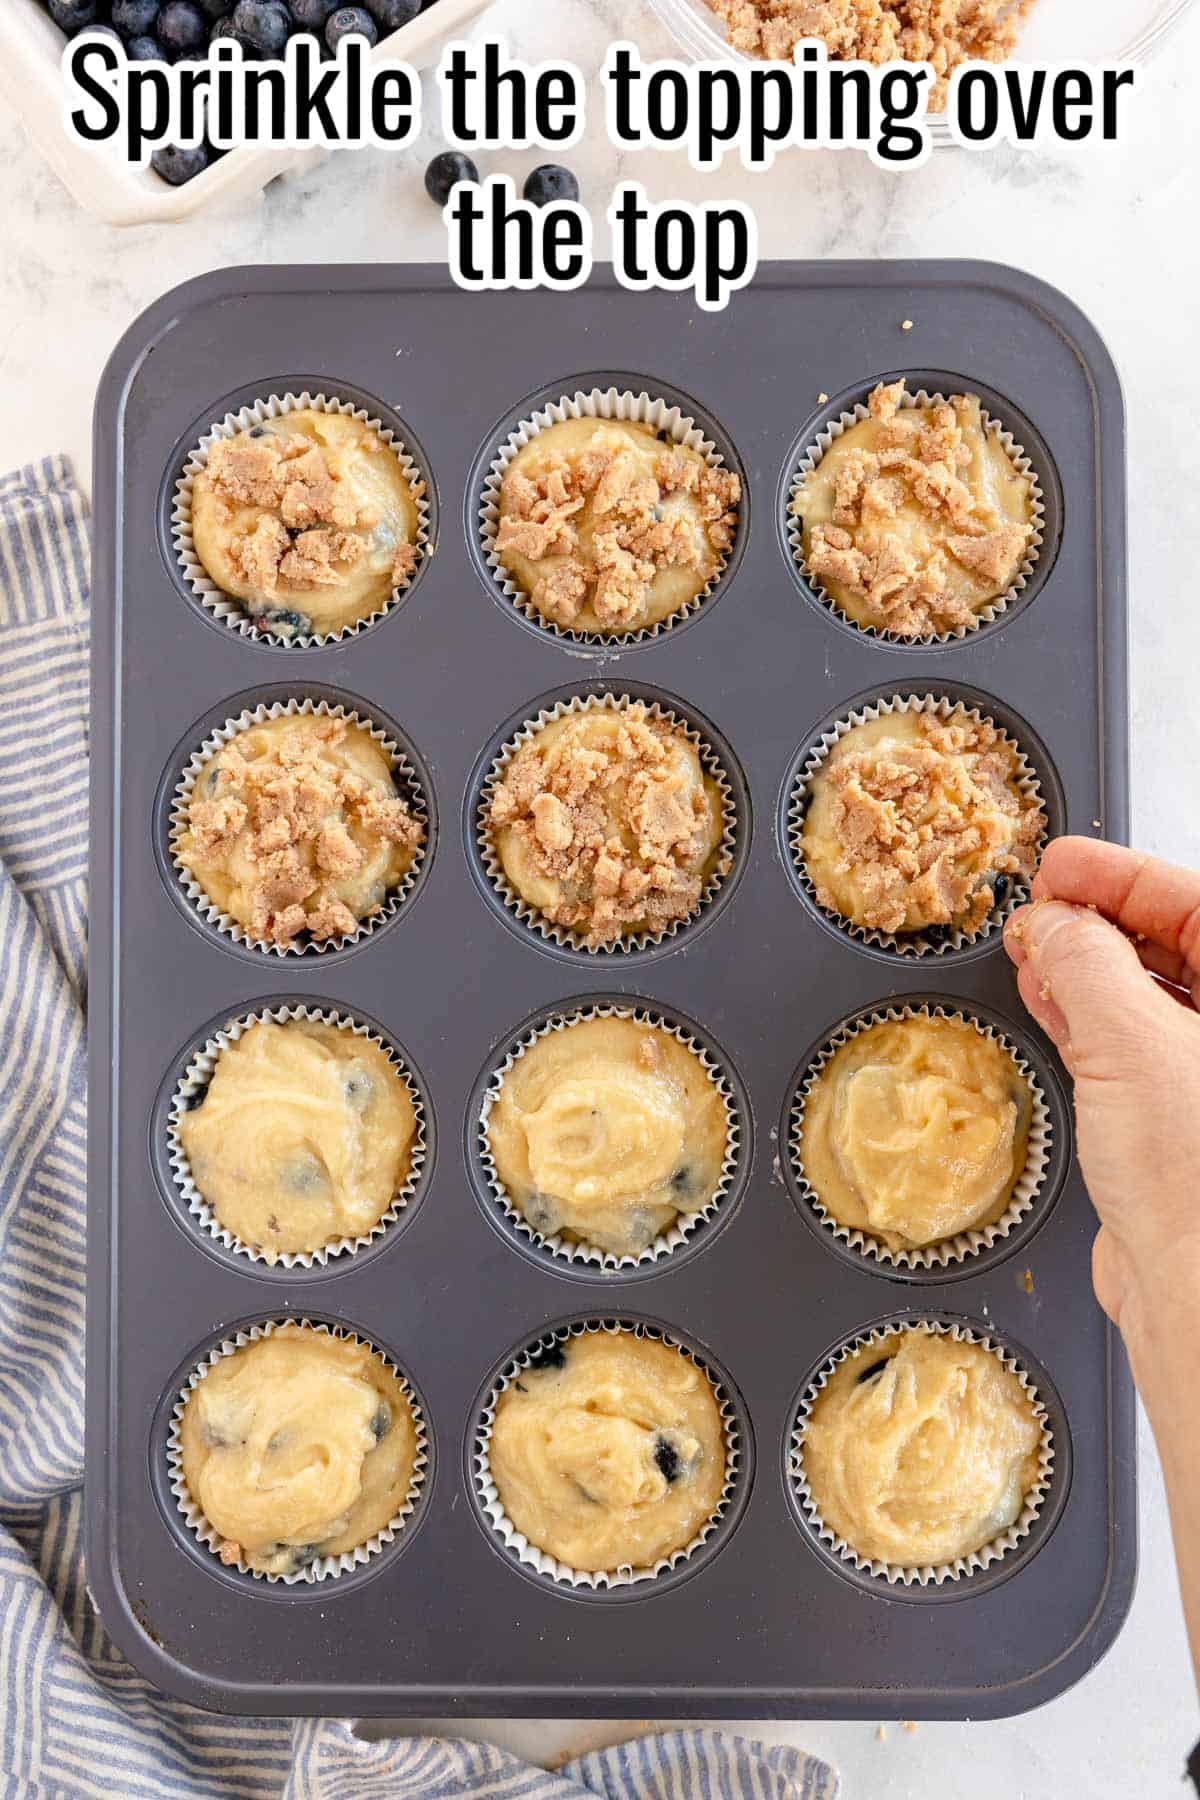 a muffin tin with 12 muffins, and a hand adding topping.